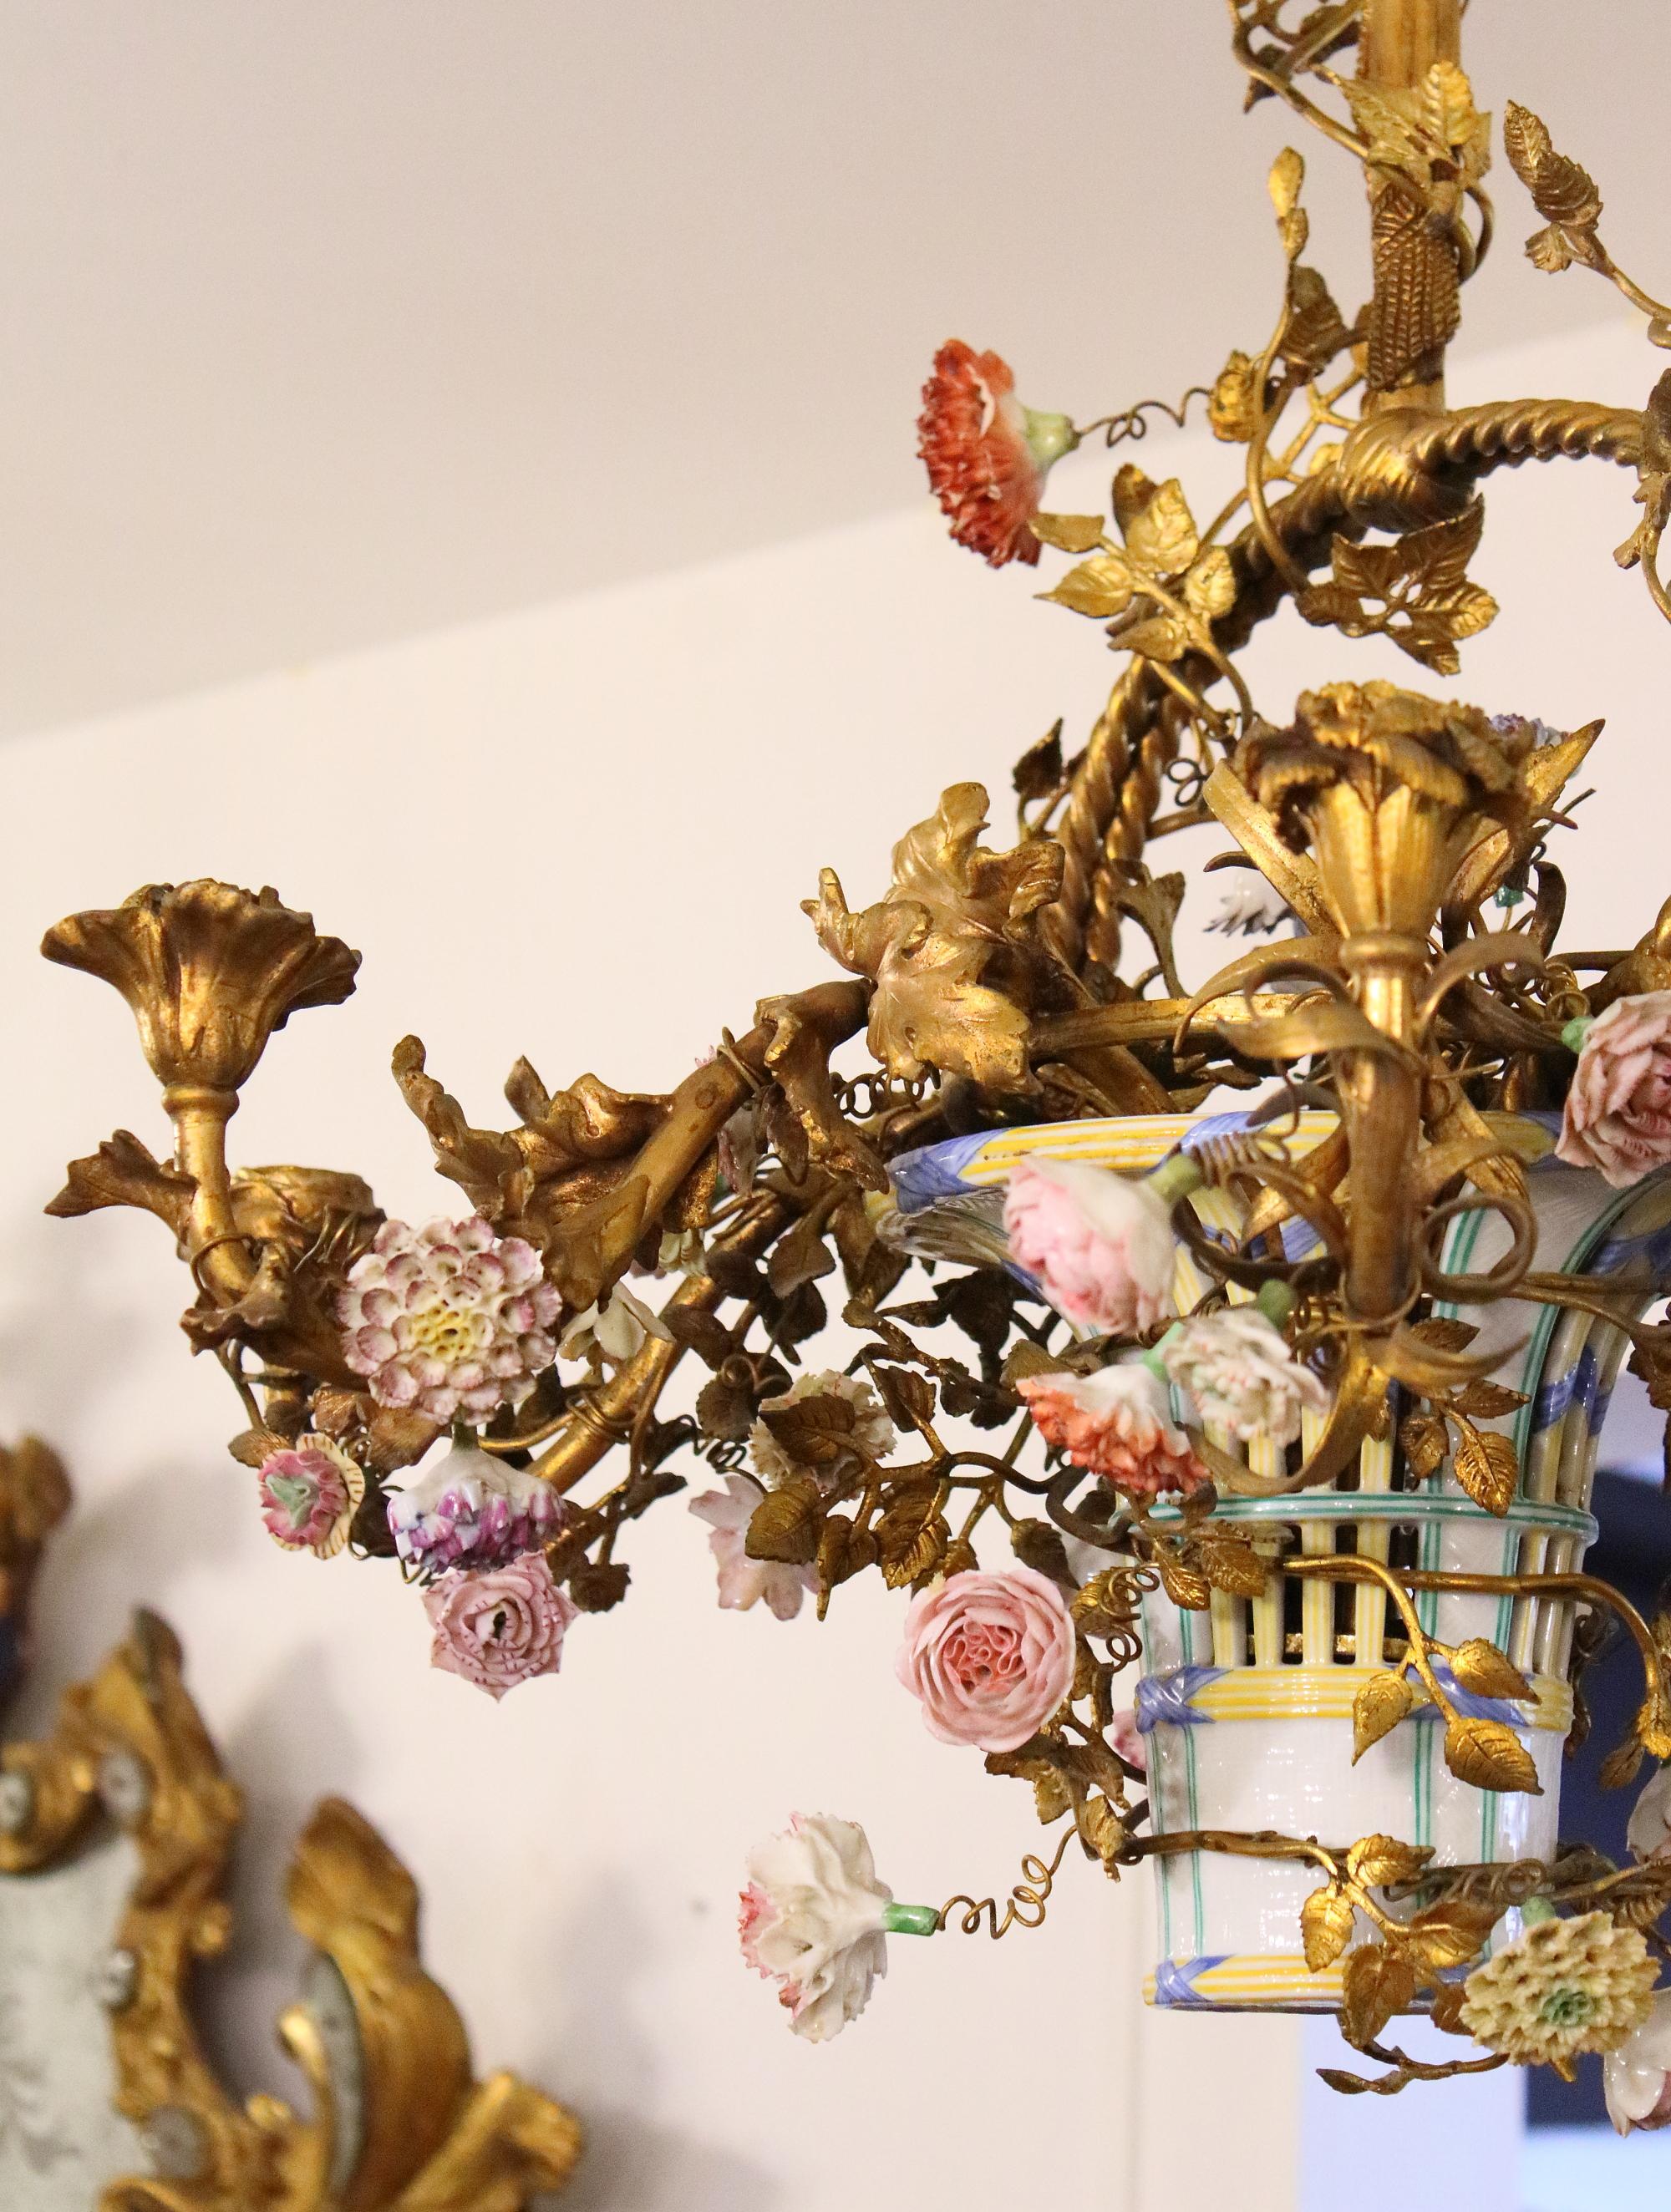 Late 19th Century French Louis XV Style Gilt Bronze Porcelain Flowers chandelier

Charming Louis XV style gilt bronze chandelier with six candle branches and a central porcelain vase/basket placed in the center of the chandelier frame. The